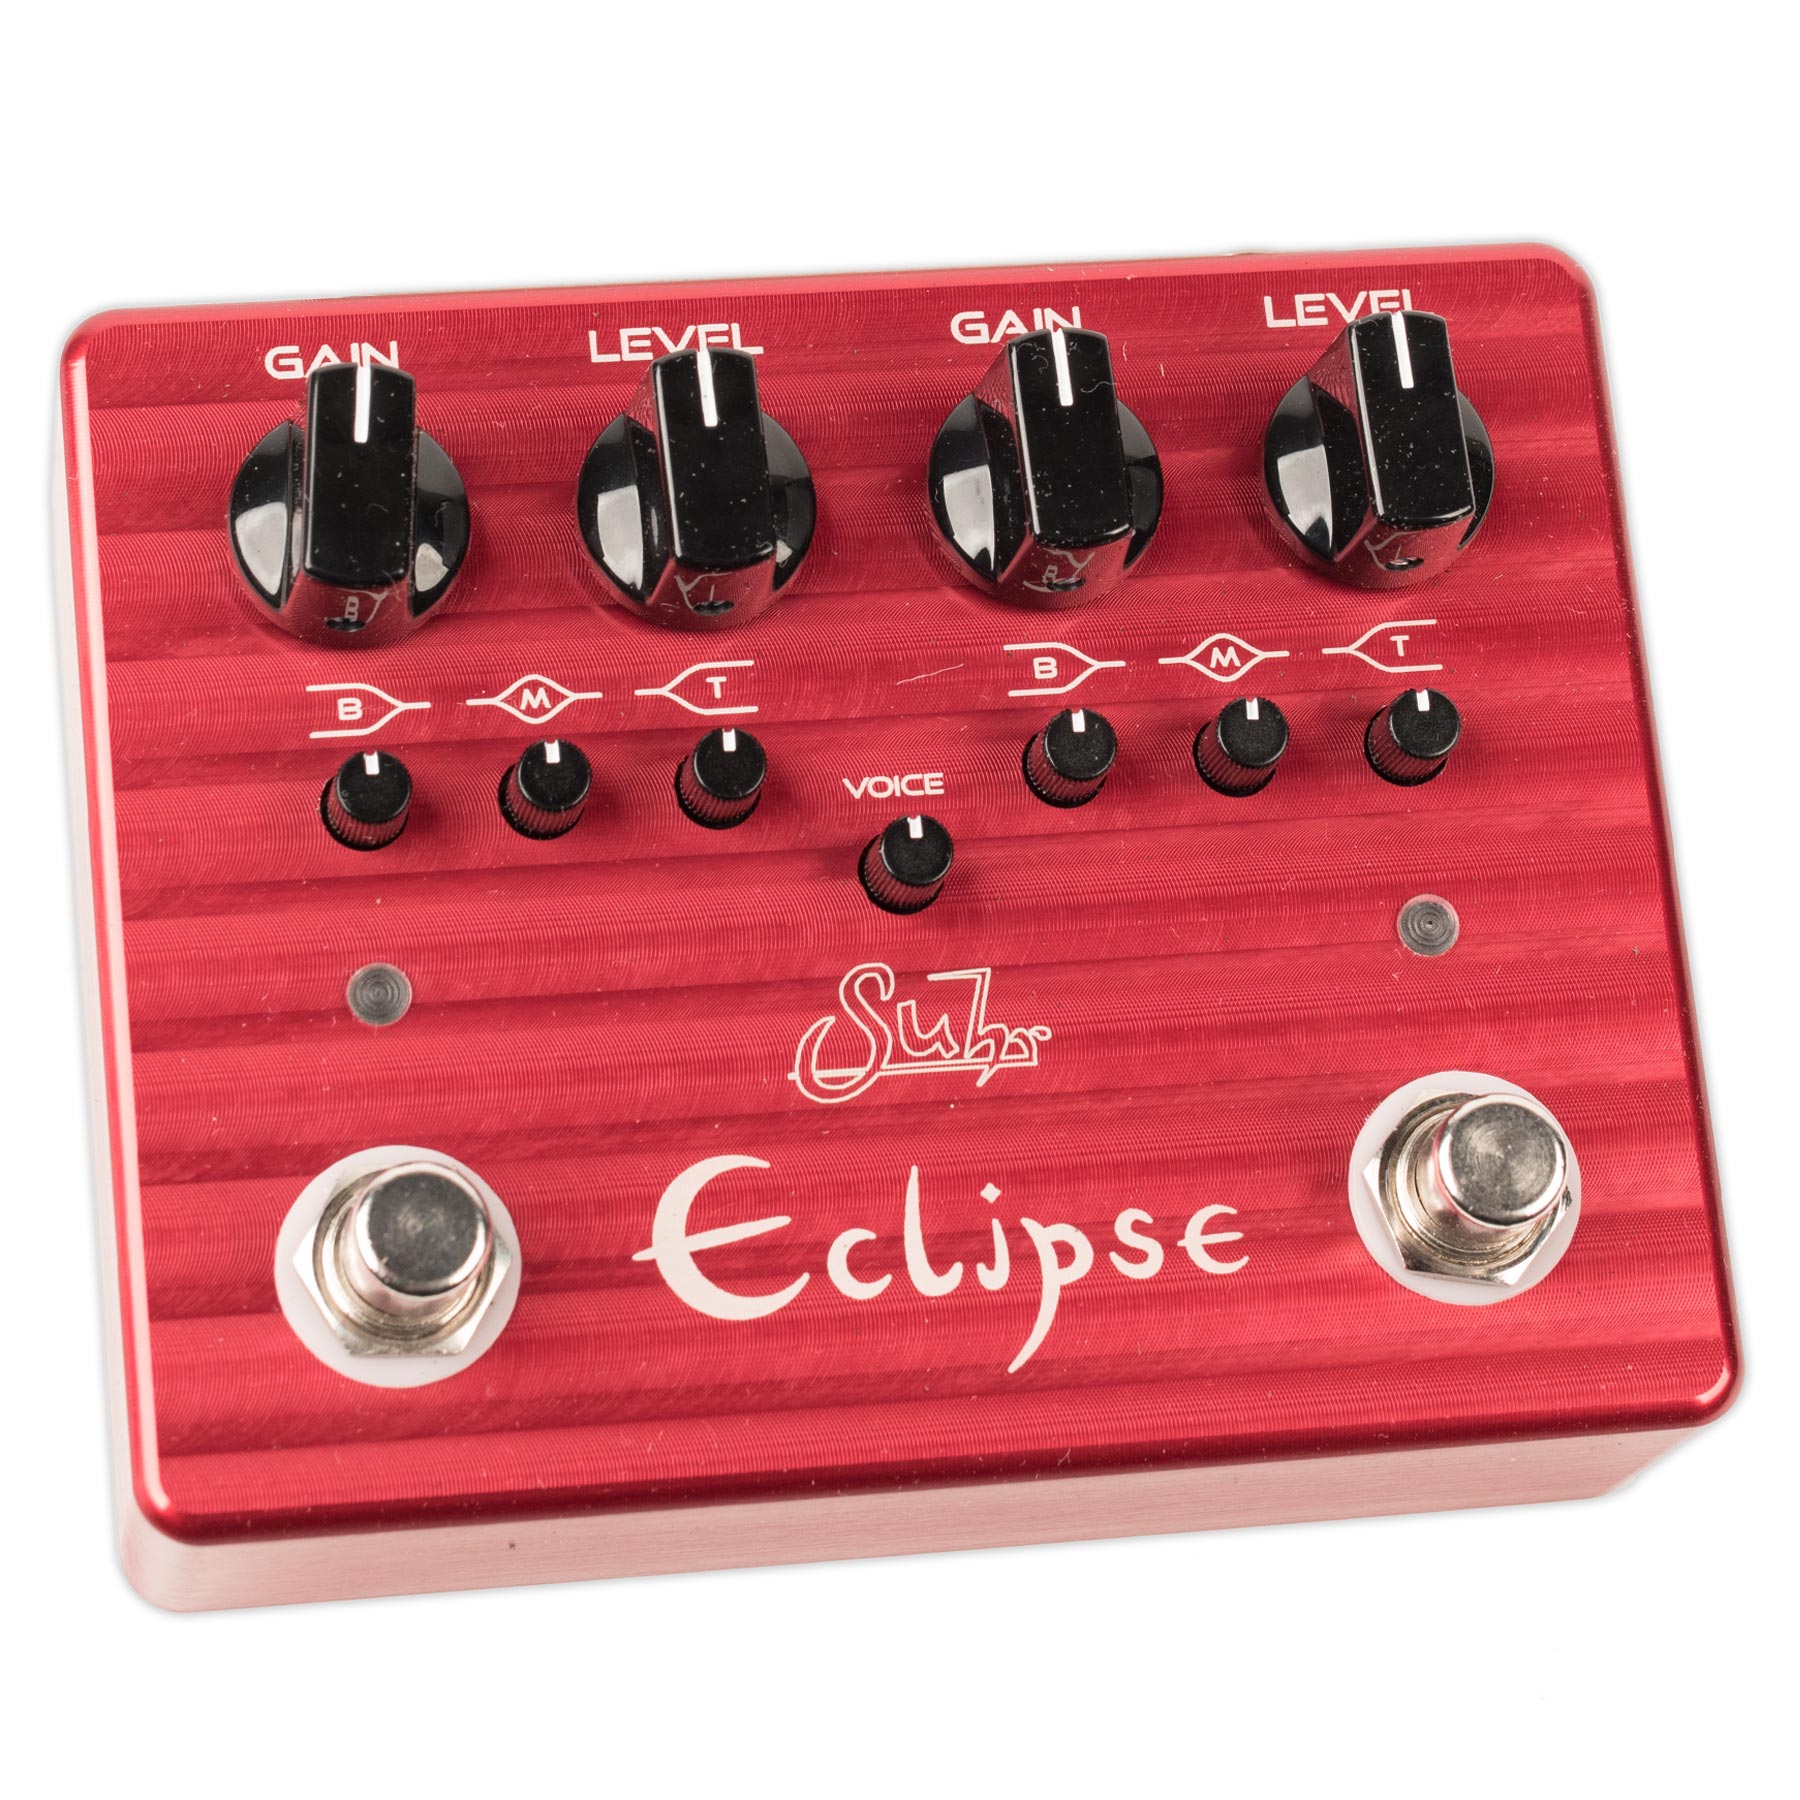 SUHR ECLIPSE DUAL CHANNEL OVERDRIVE/DISTORTION PEDAL   Stang Guitars